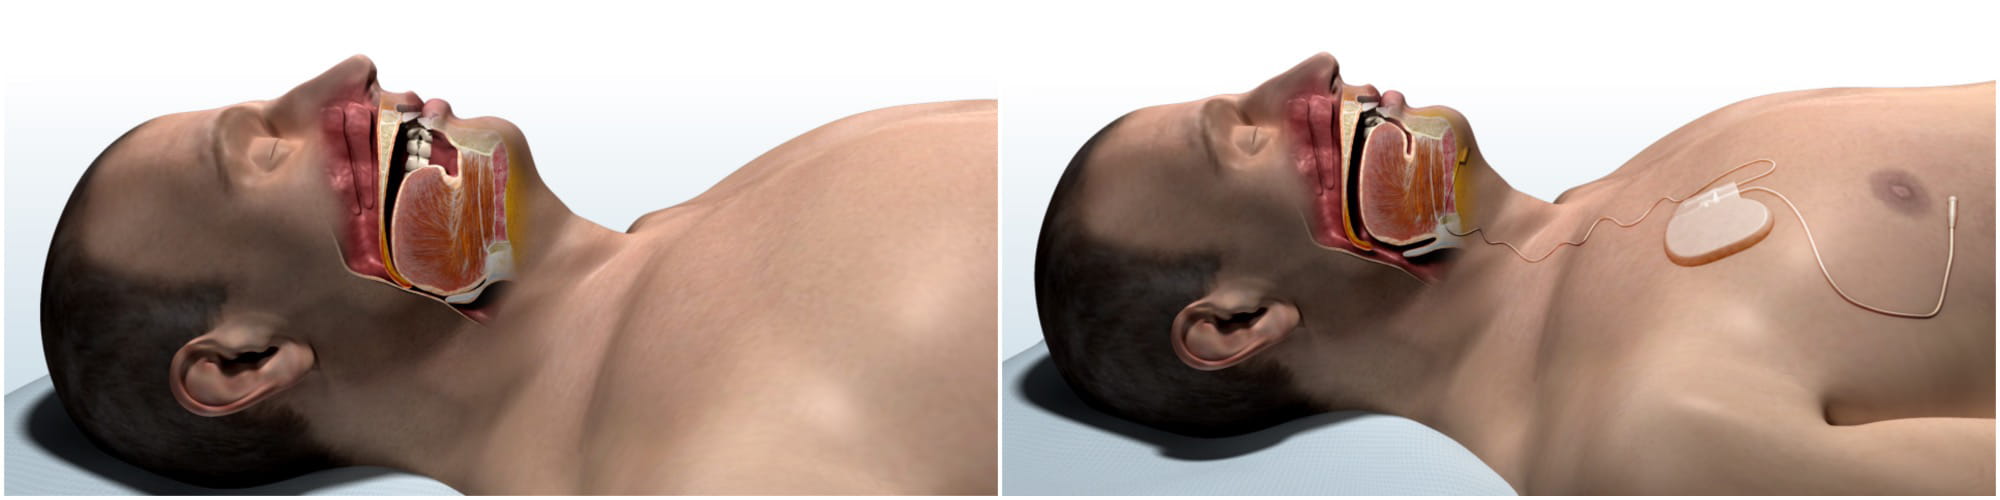 computer generated drawings of the anatomy of a man's throat and mouth during sleep